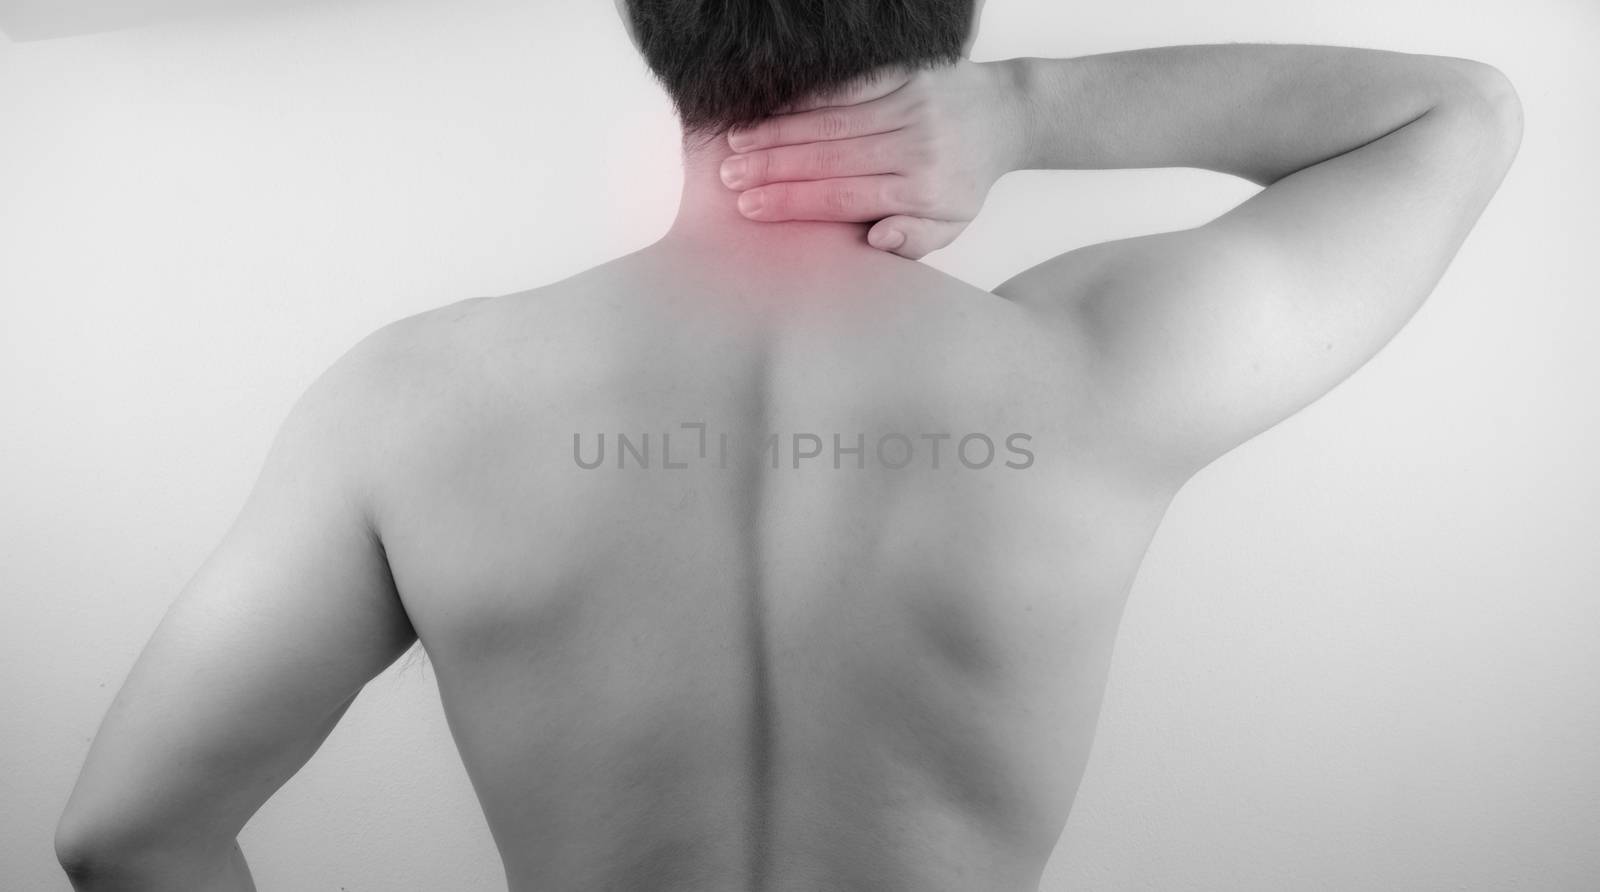 A man feeling exhausted and suffering from neck and shoulder pain and injury on white background. Healthcare and medical concept.